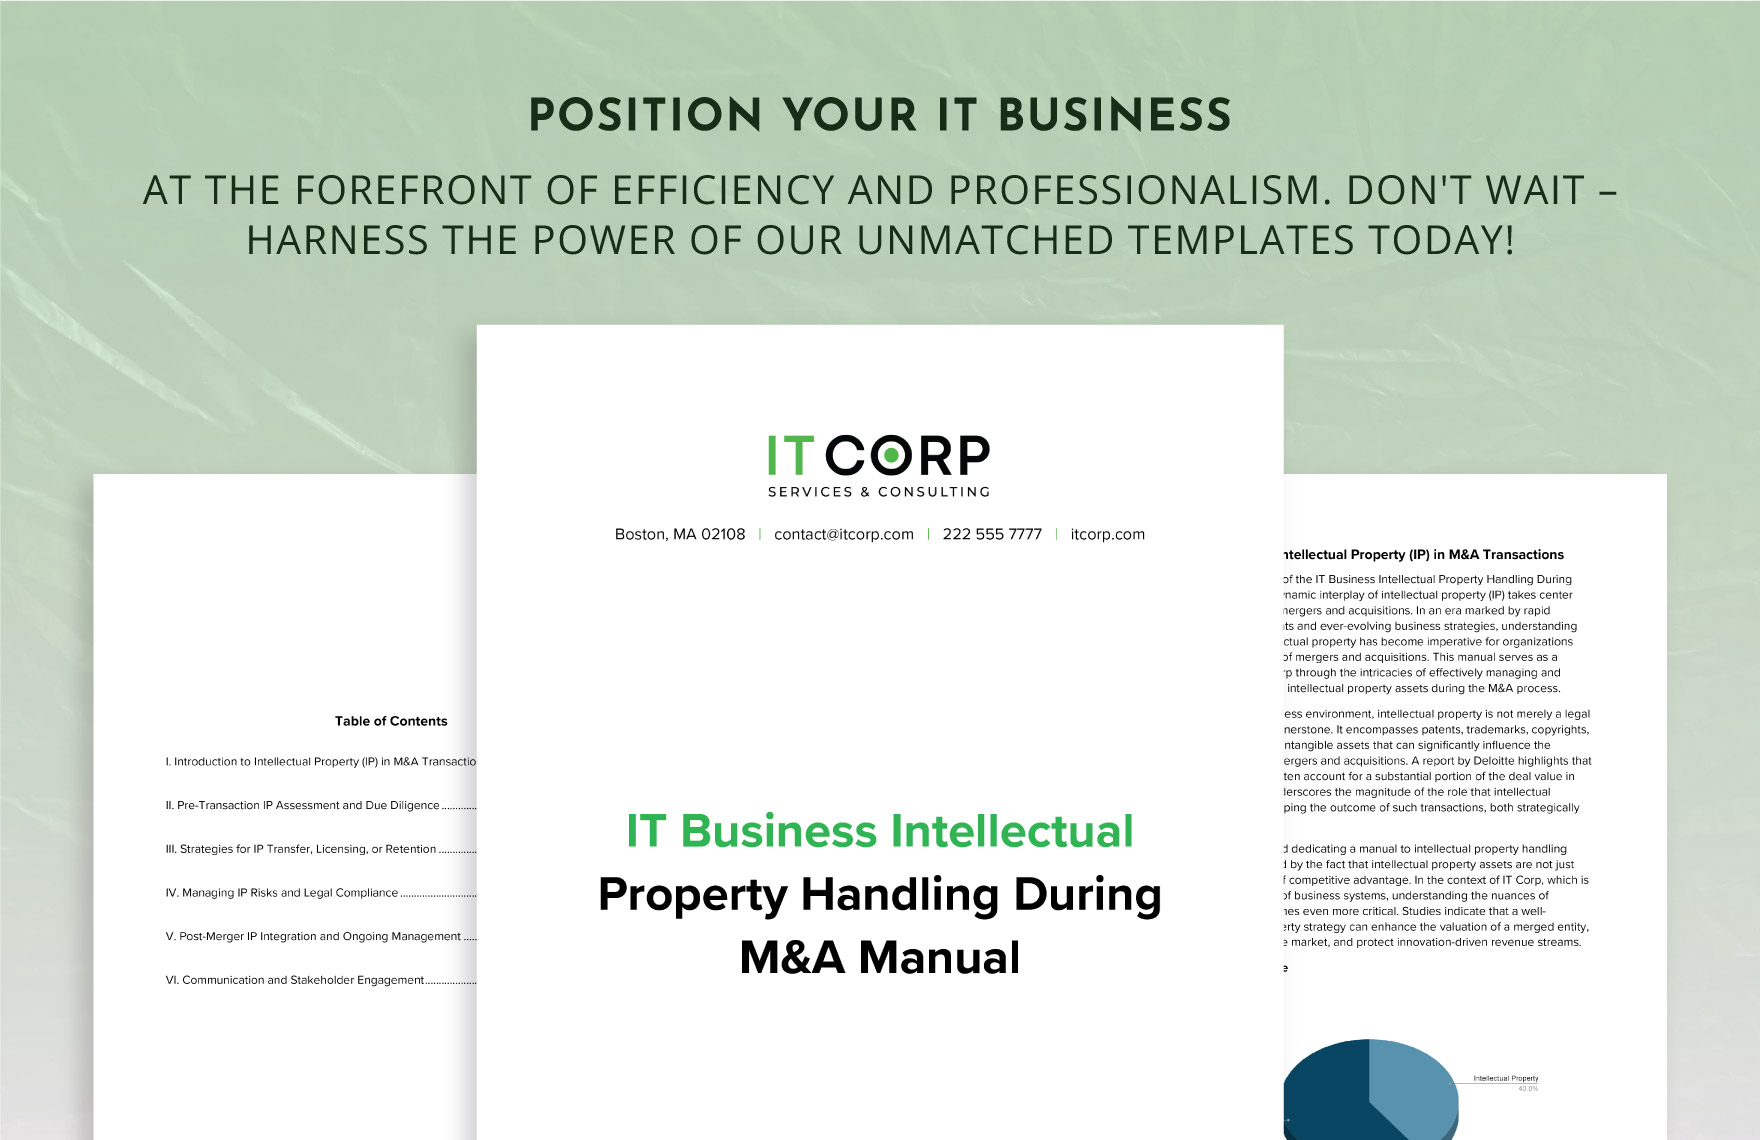 IT Business Intellectual Property Handling During M&A Manual Template